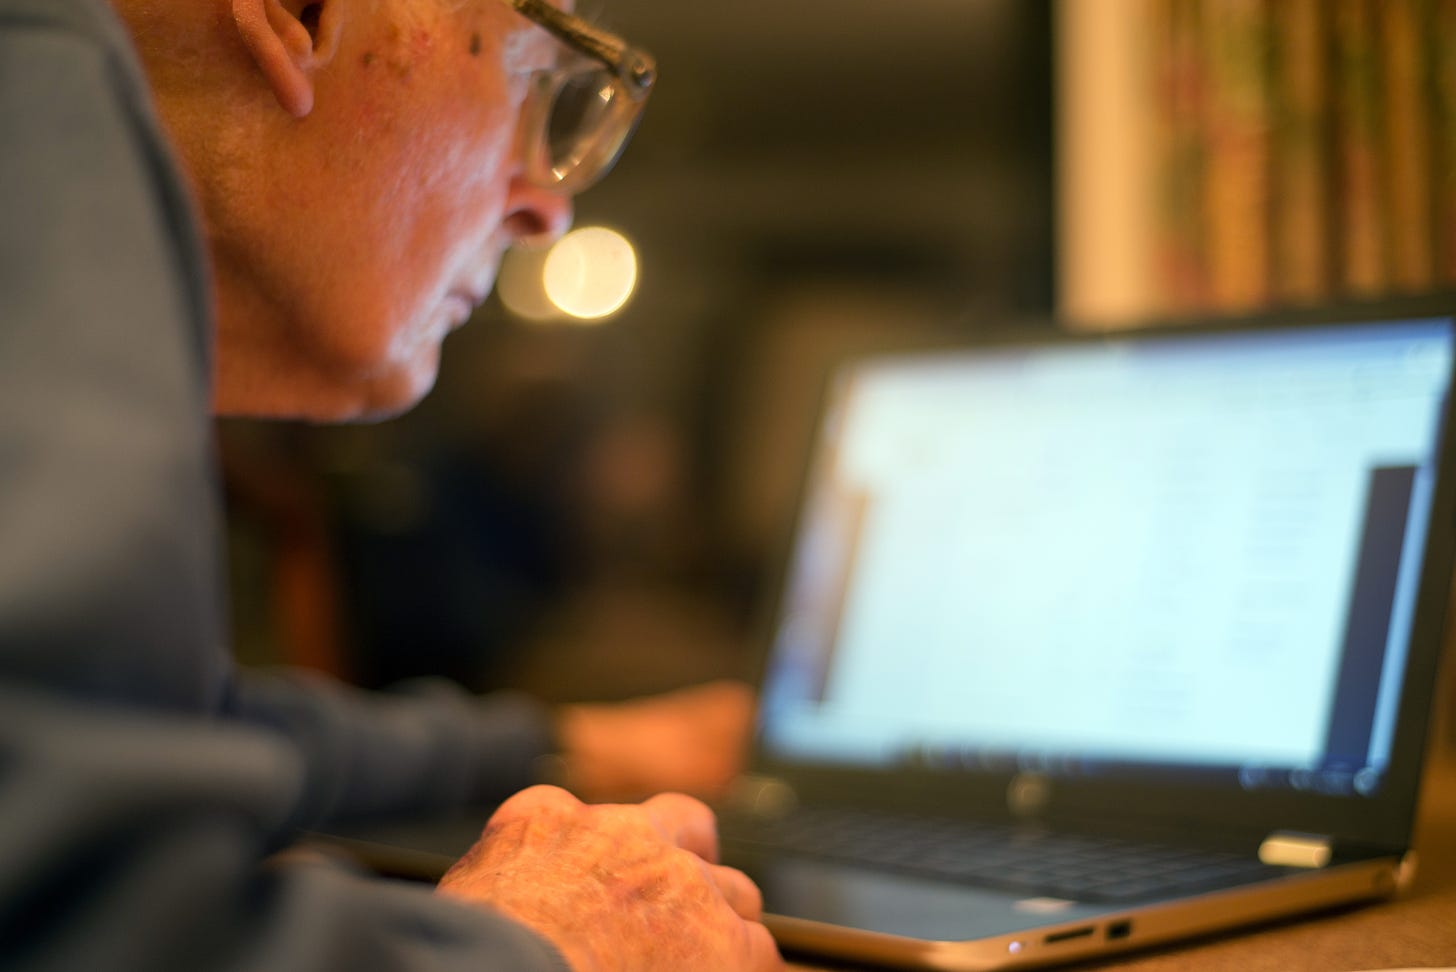 An elderly man wearing glasses leans forward and looks at a laptop.